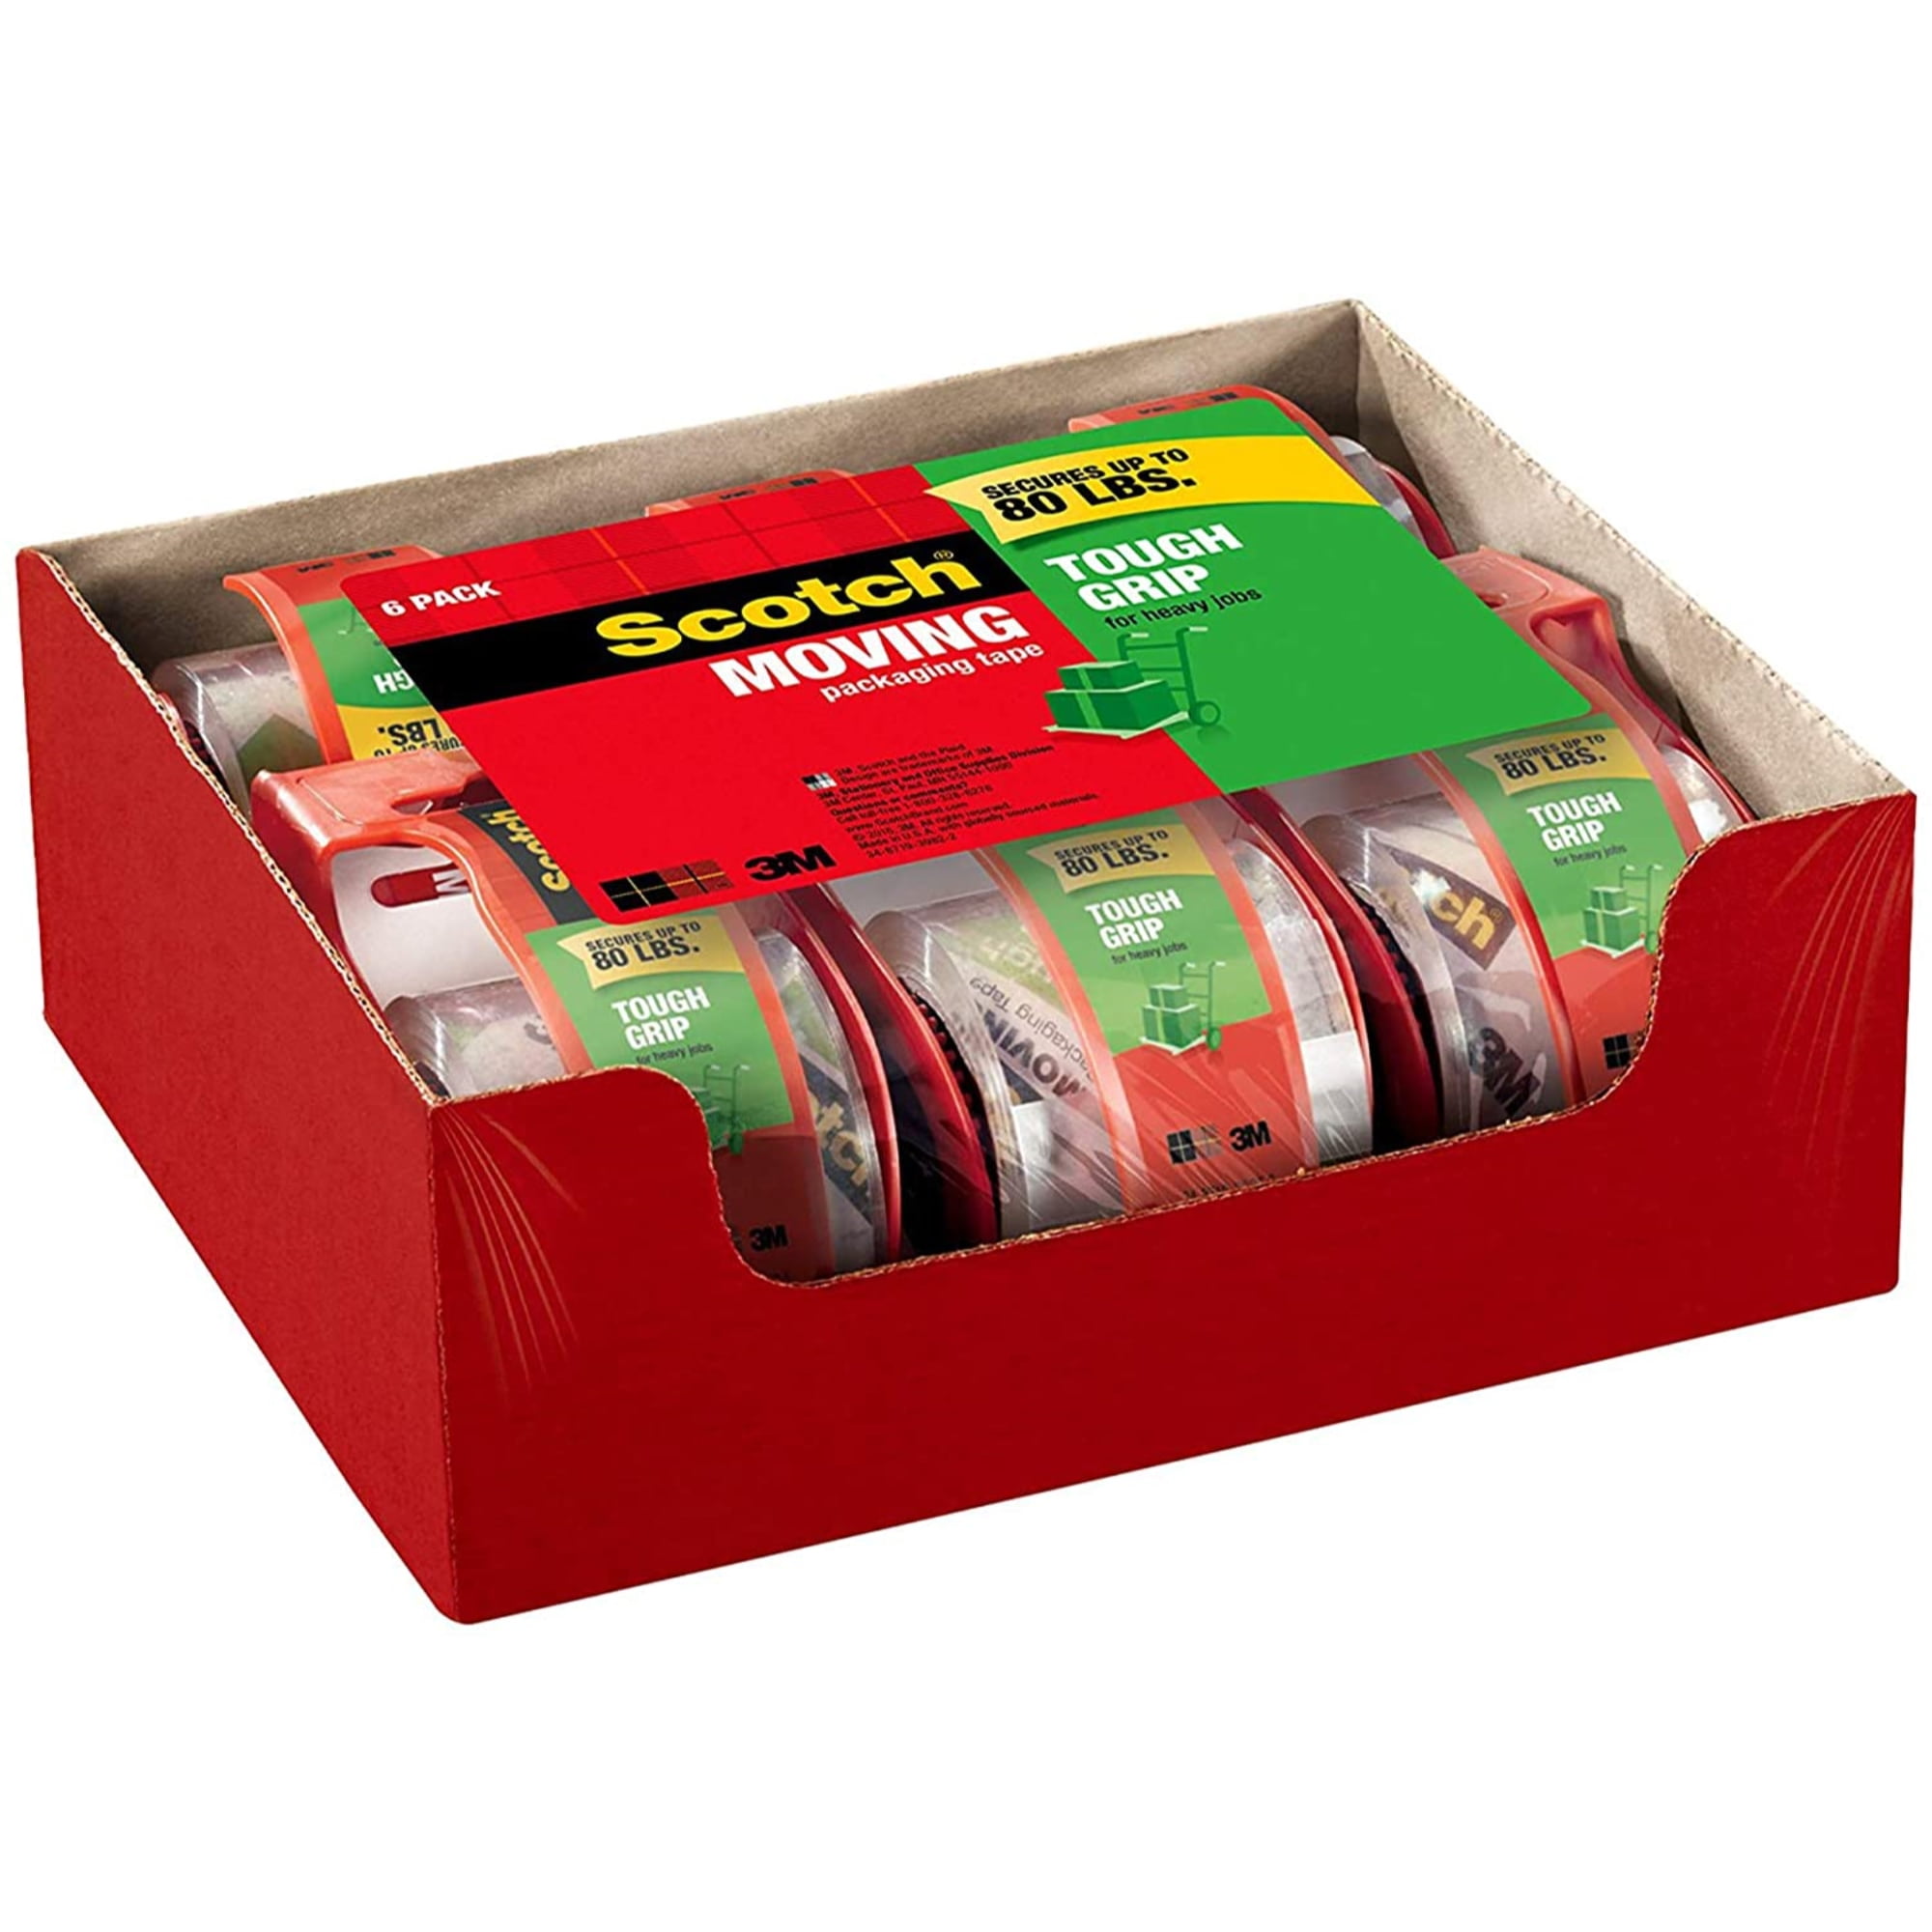 Scotch Tough Grip Moving Packaging Tape 3500-21RD-3GC, 1.88 in x 54.6 yd  (48 mm x 50 m) with dispenser 91118 - Strobels Supply